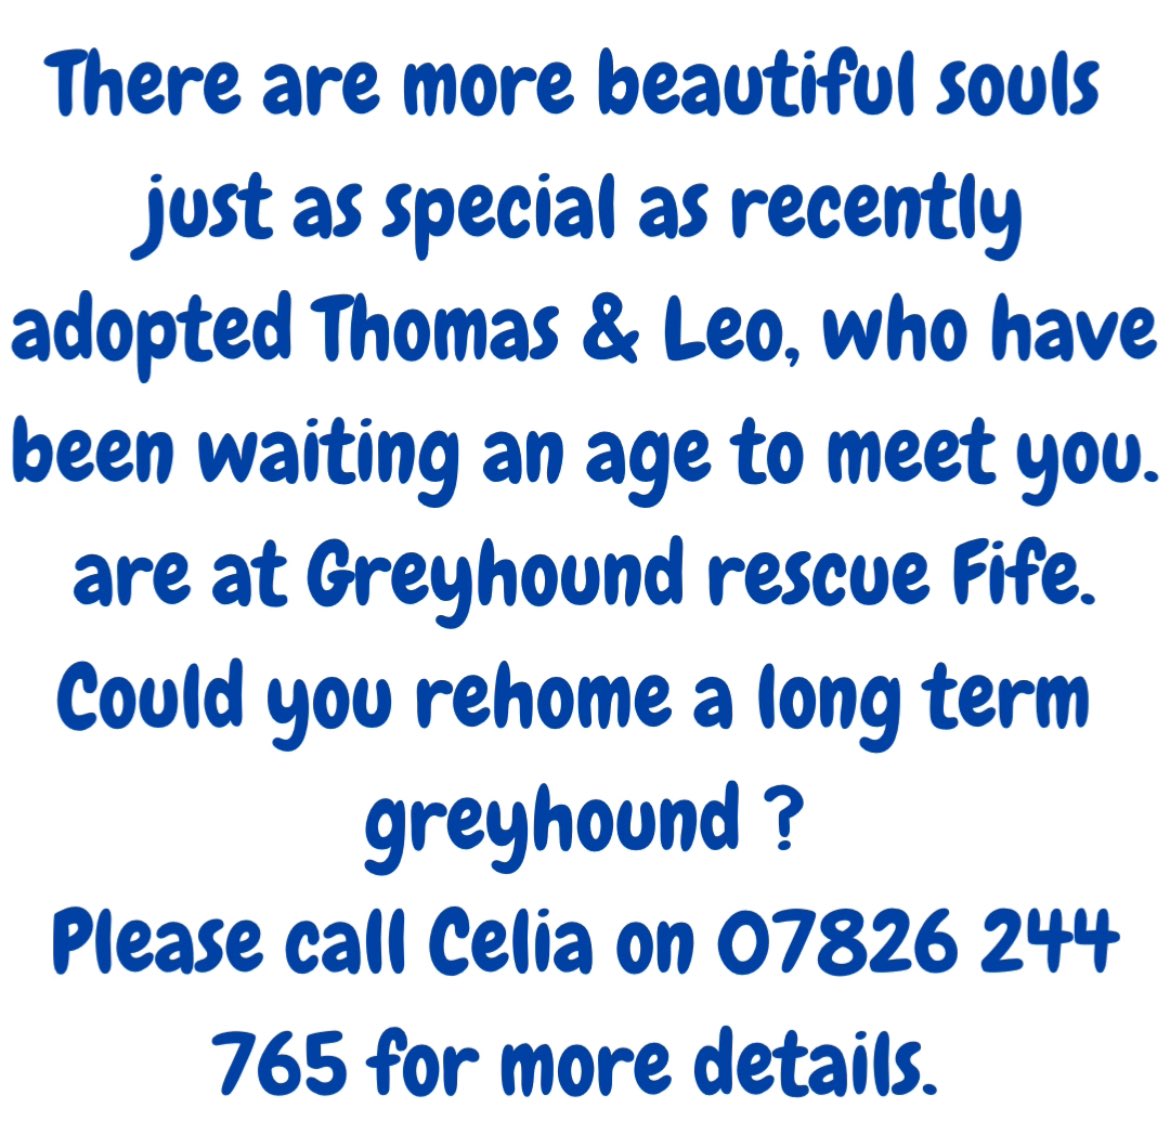 We never give up on our #Greyhounds waiting for a home. Long termer’s Thomas & Leo both found adopters who took a chance on them. Now it’s Bob, Matt,Netty, Reece, Ruby & Scouts turn. All beautiful souls waiting over a yr in rescue. Take a chance, please ☎️Celia on 07826 244765 🤞🏽